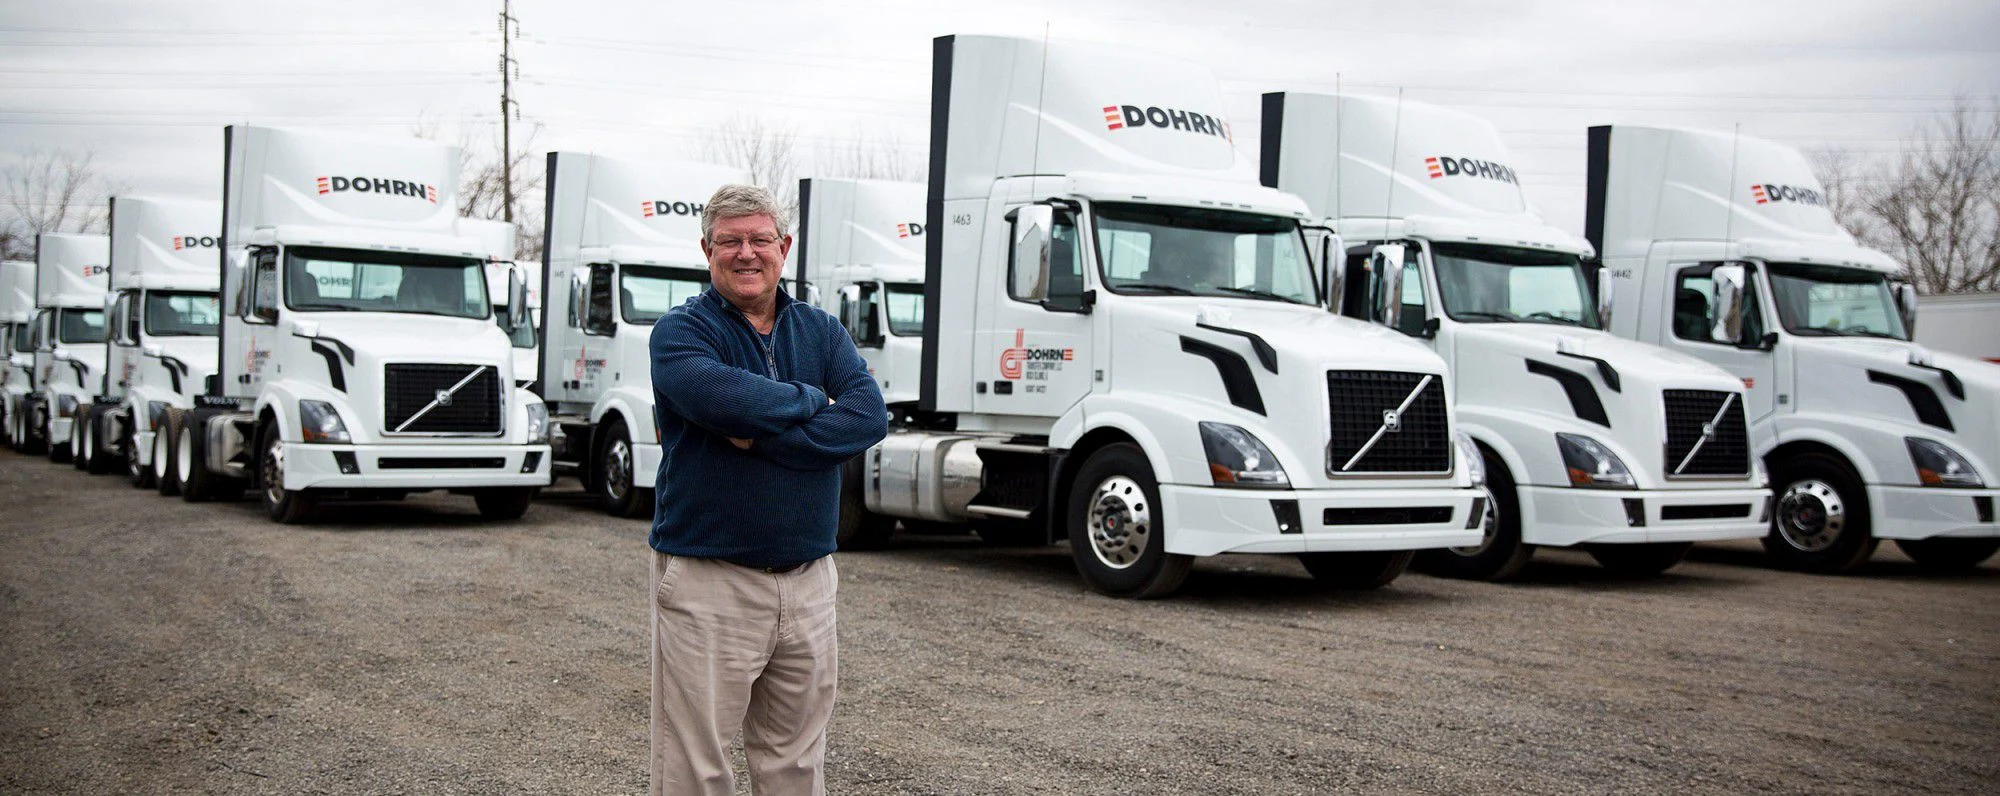 Dohrn Transfer Company reduces harsh events by 88% with driver gamification  